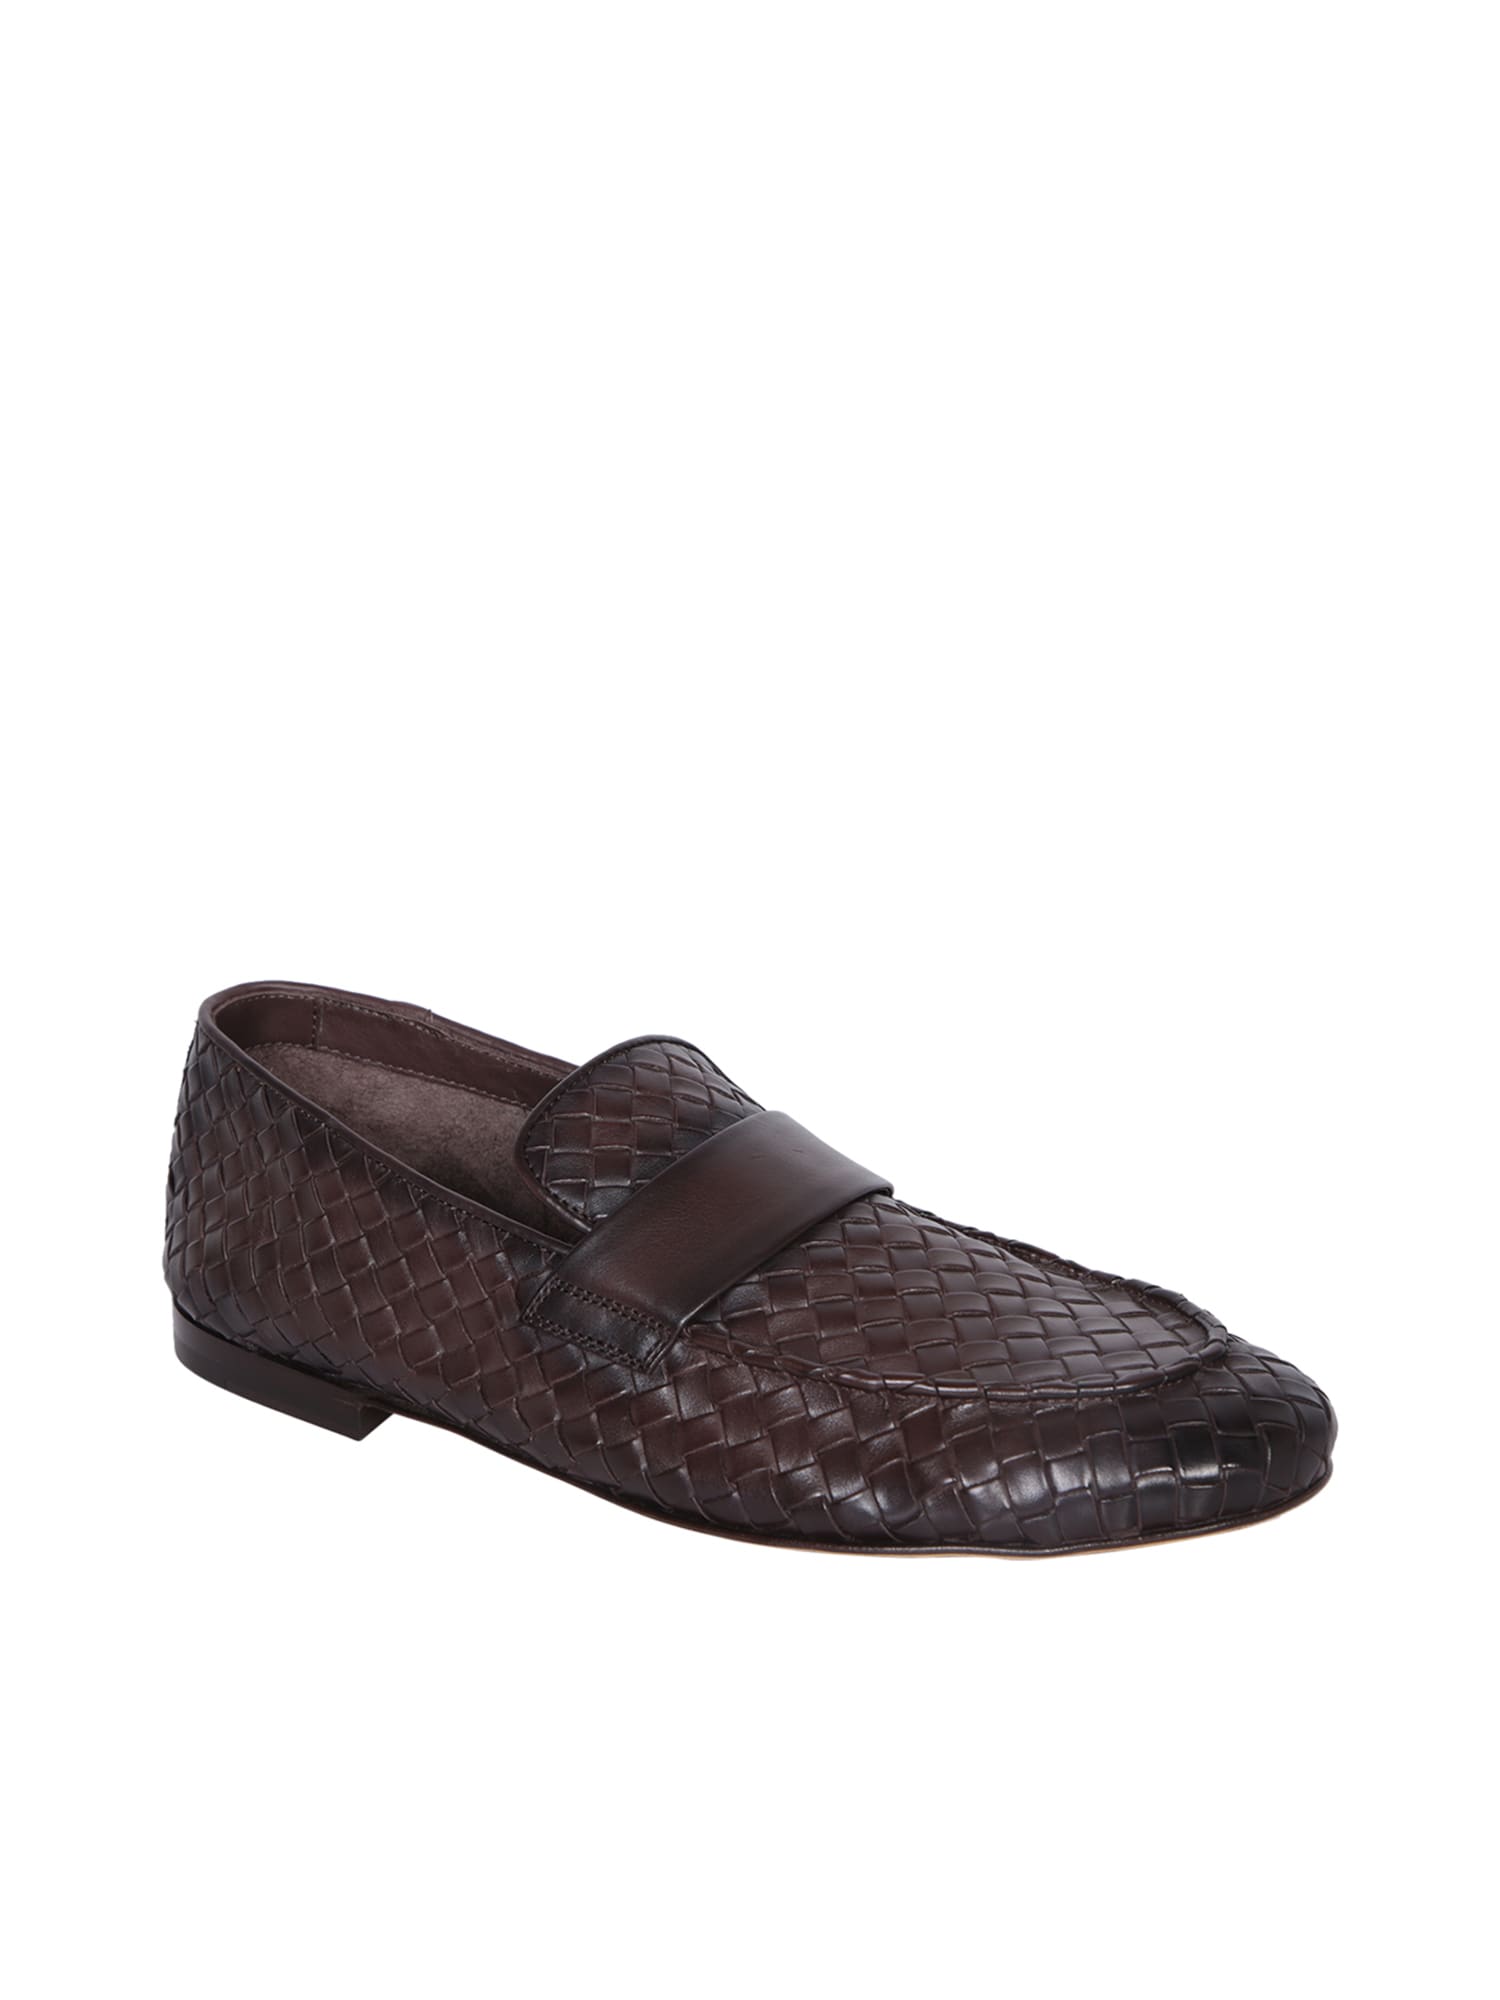 Shop Officine Creative Airto 011 Braided Brown Loafer